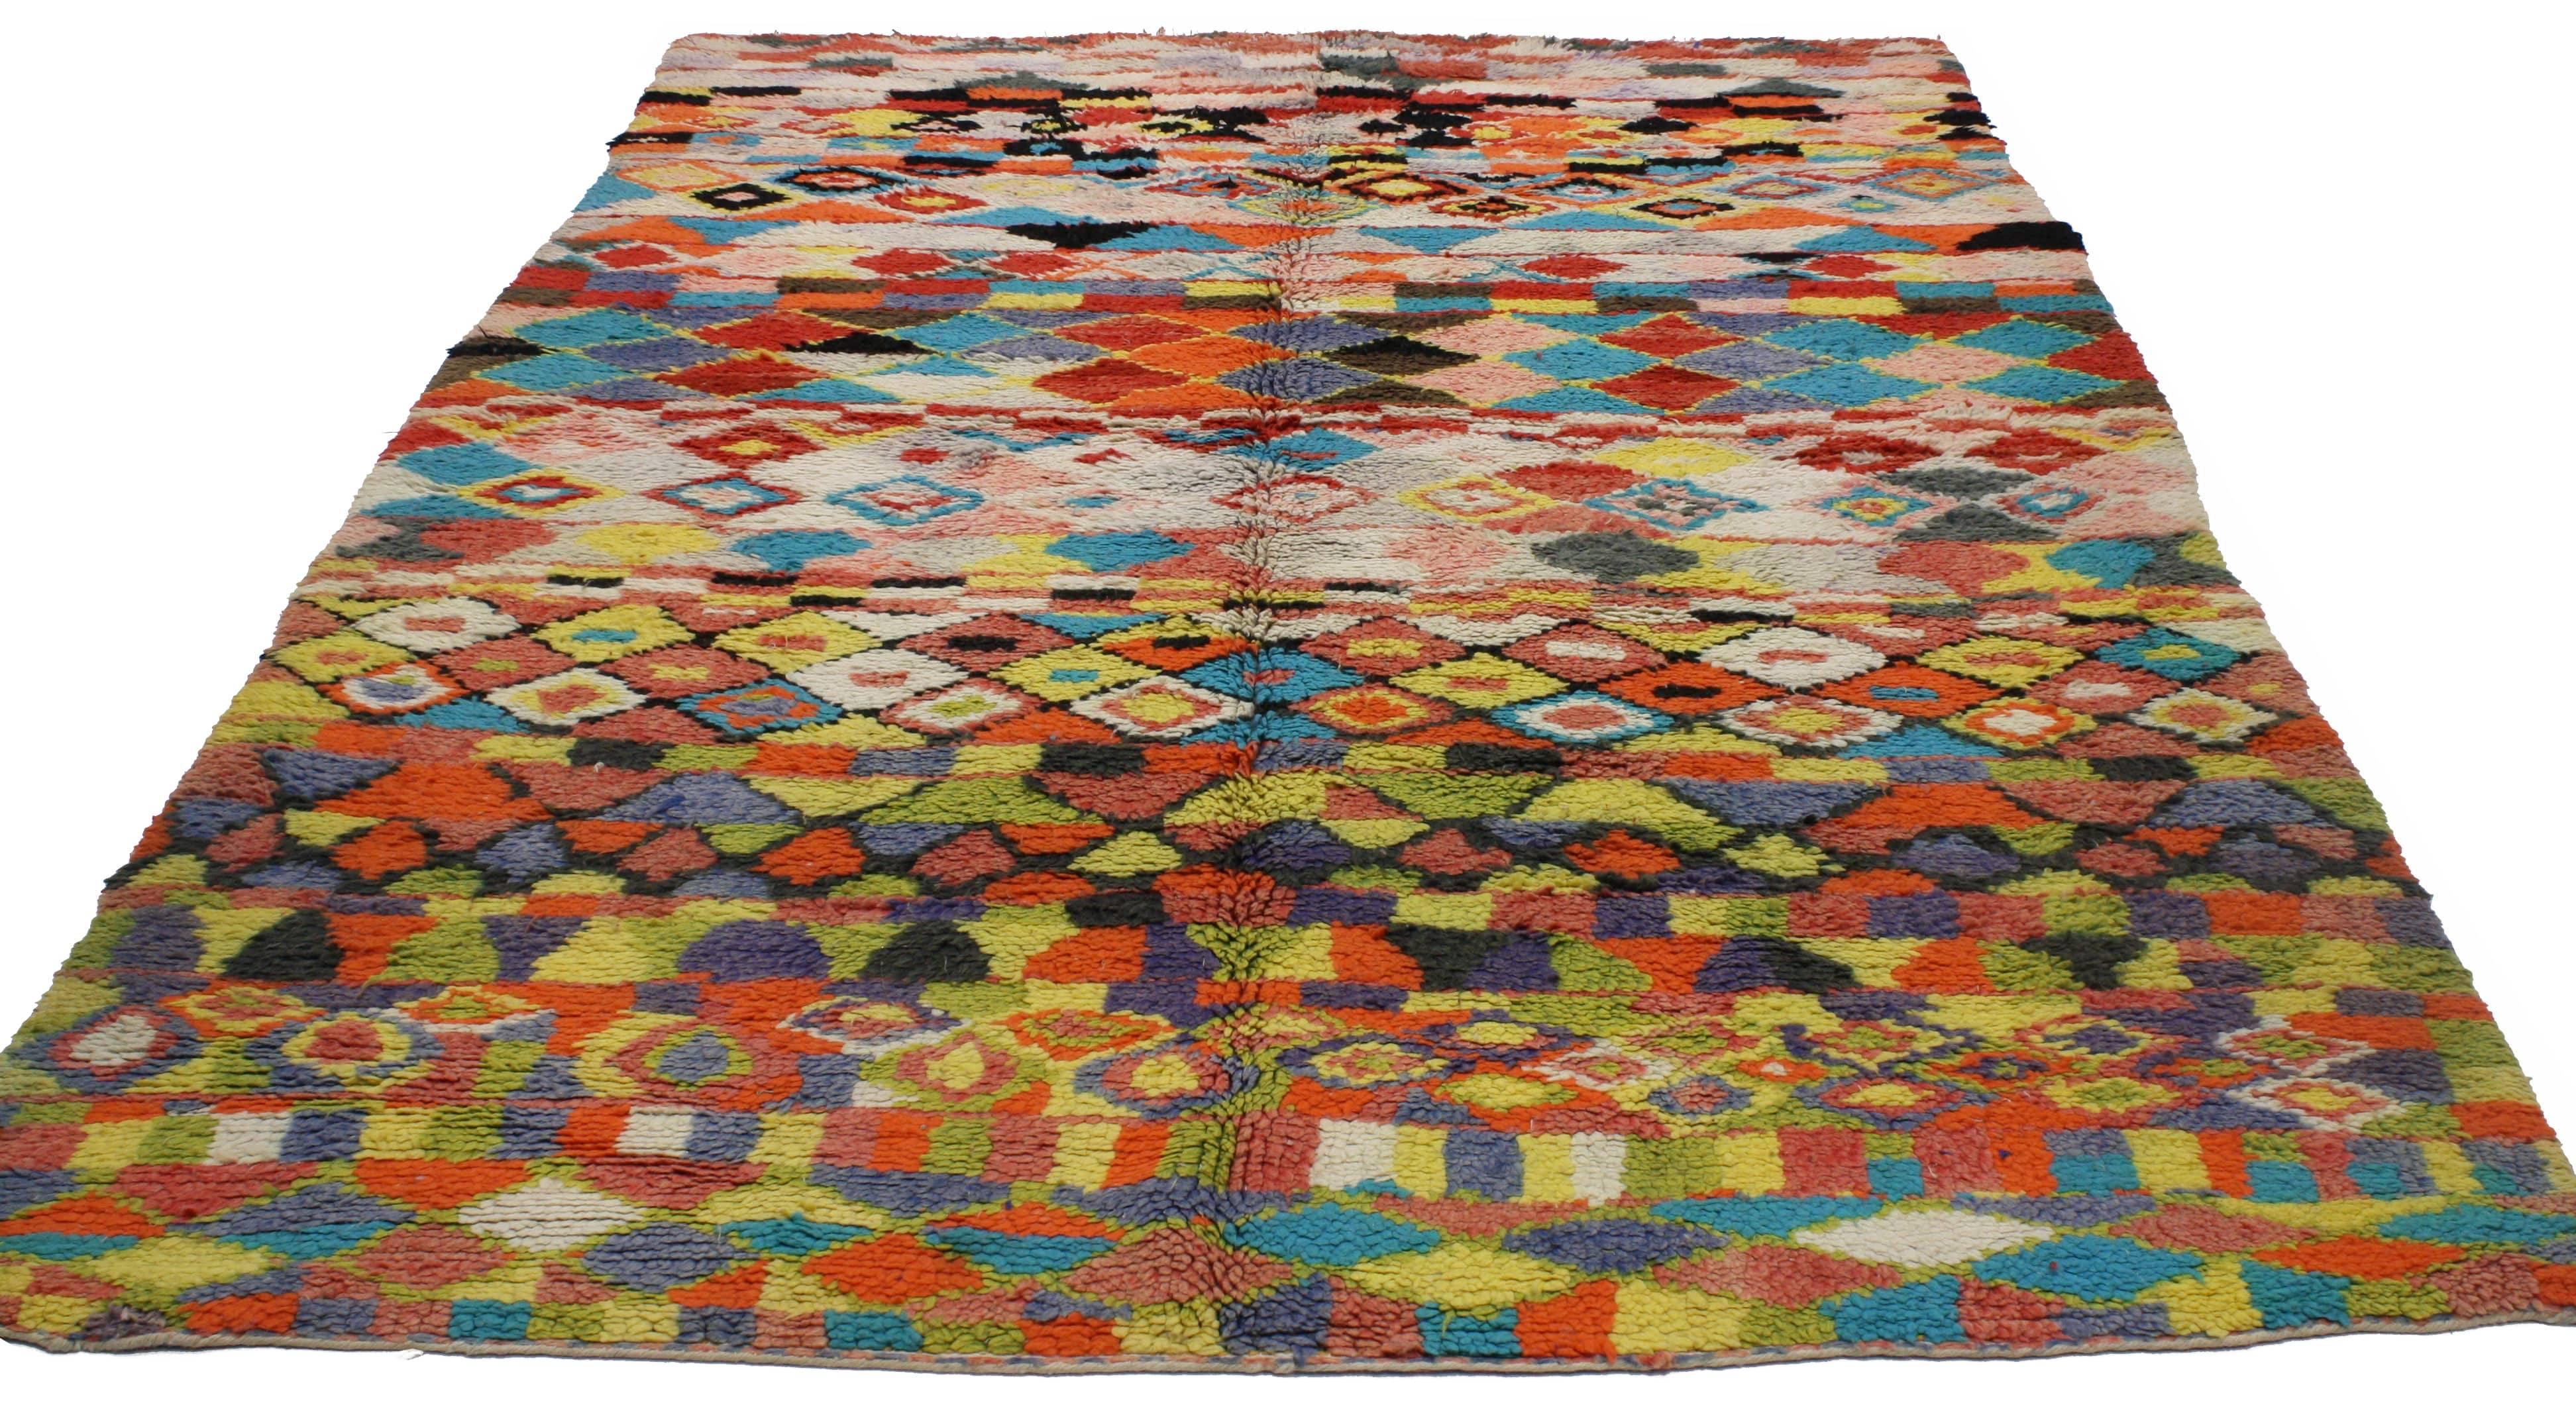 Wool Vintage Moroccan Rug with Contemporary Abstract Design, Berber Moroccan Rug